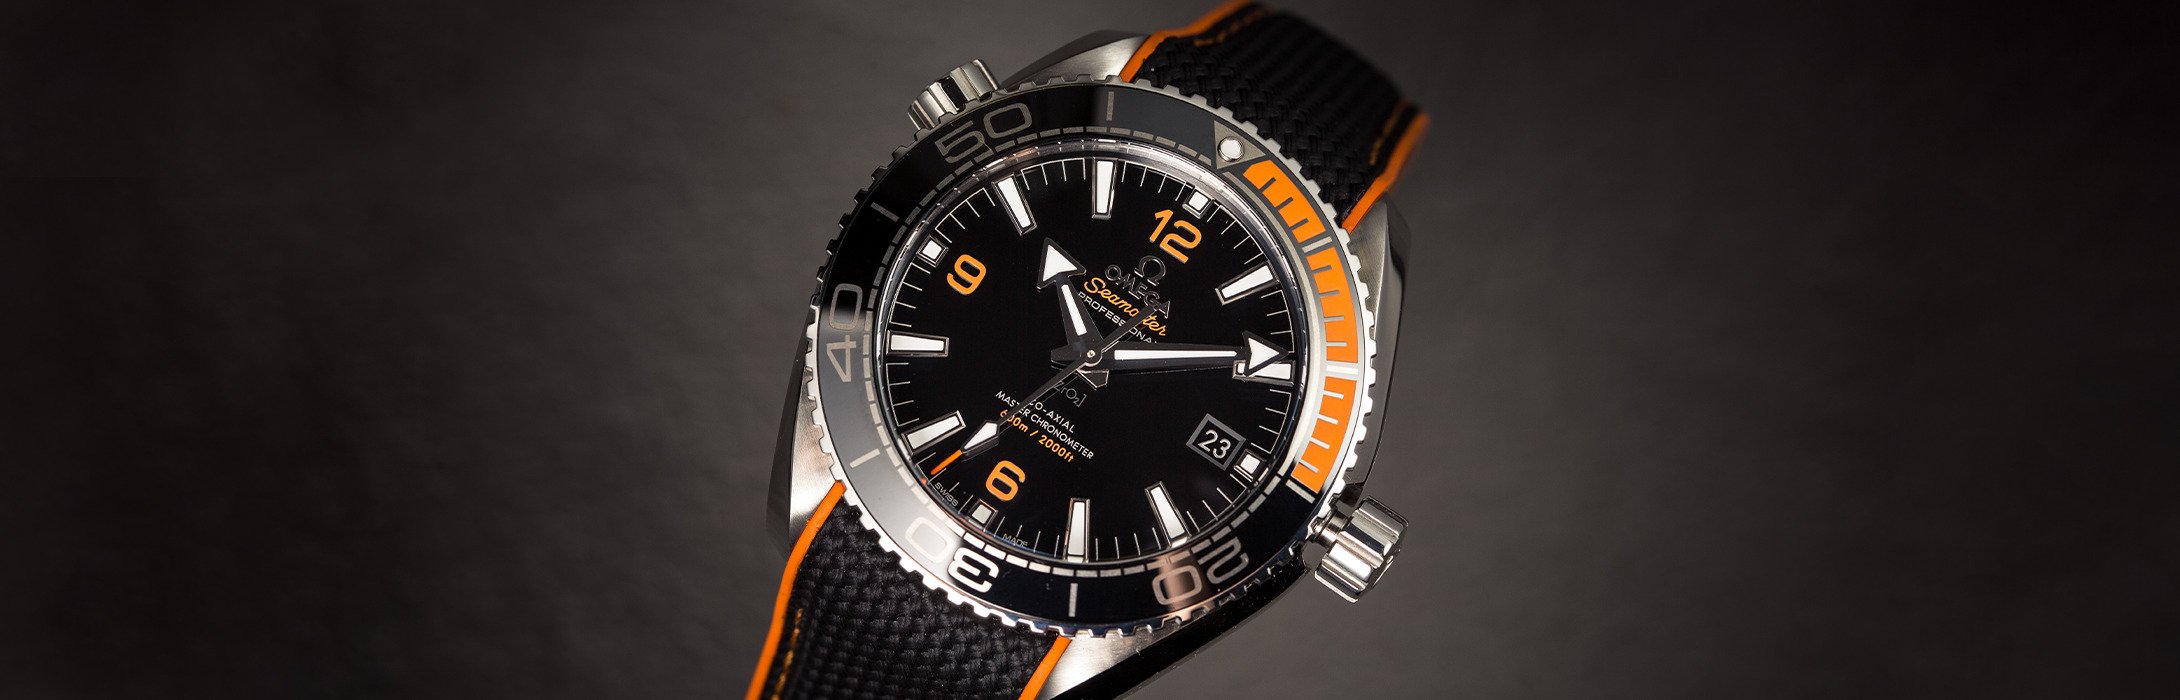 Seagull's Ocean Star Watches are Built for Aquatic Adventure